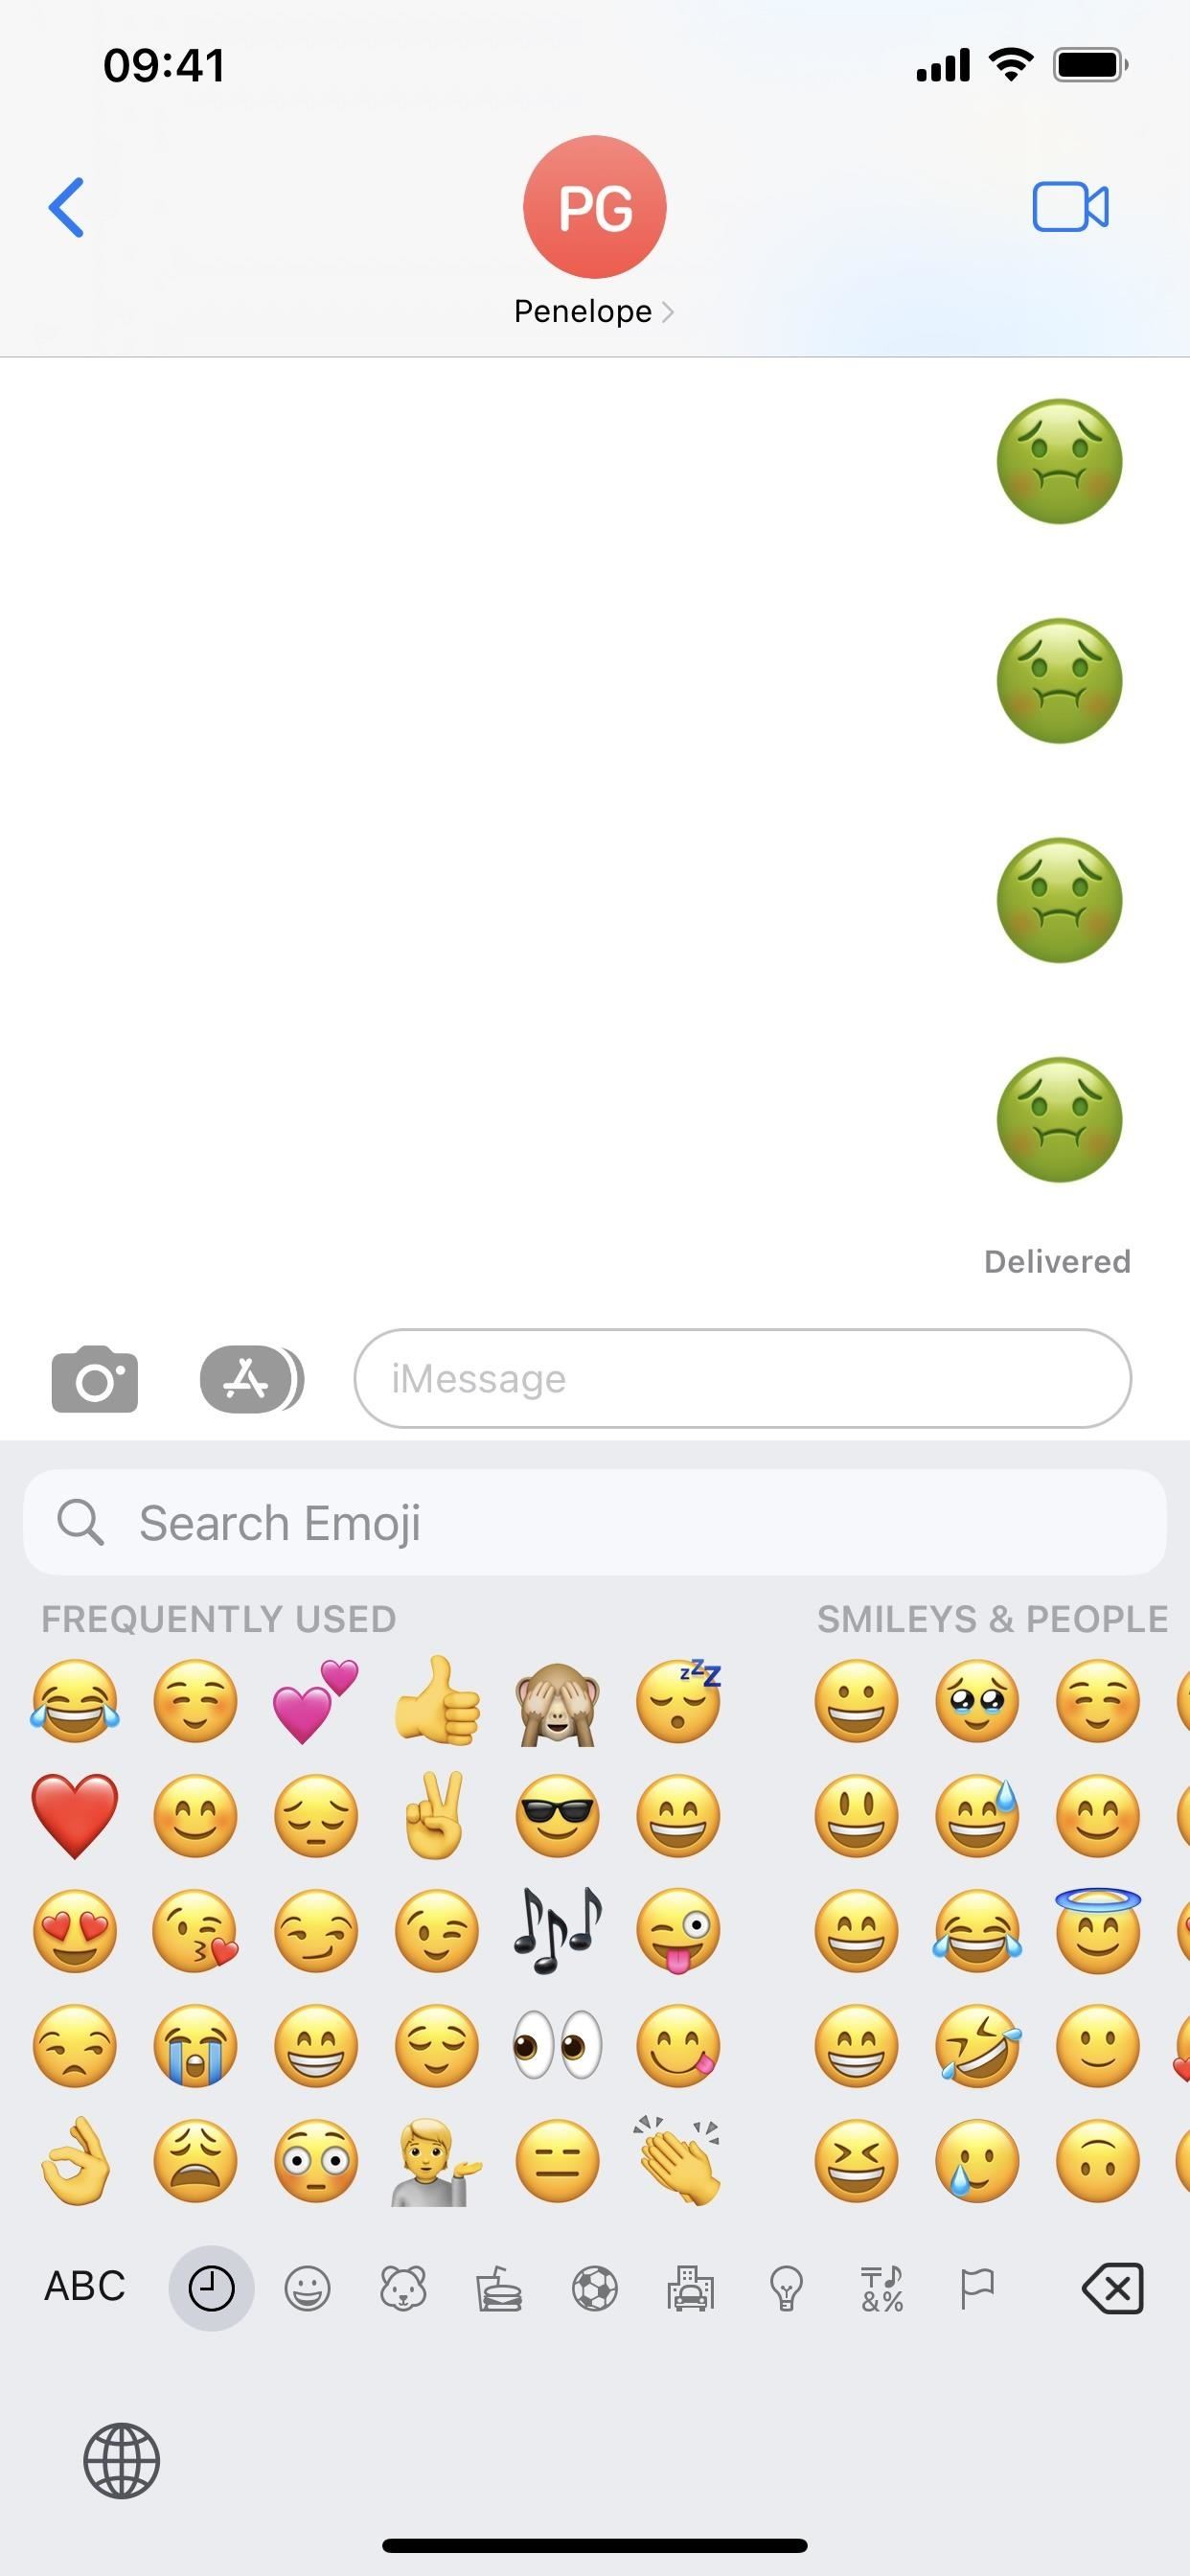 How to Clear Your Frequently Used and Recent Emoji from Your iPhone's Keyboard